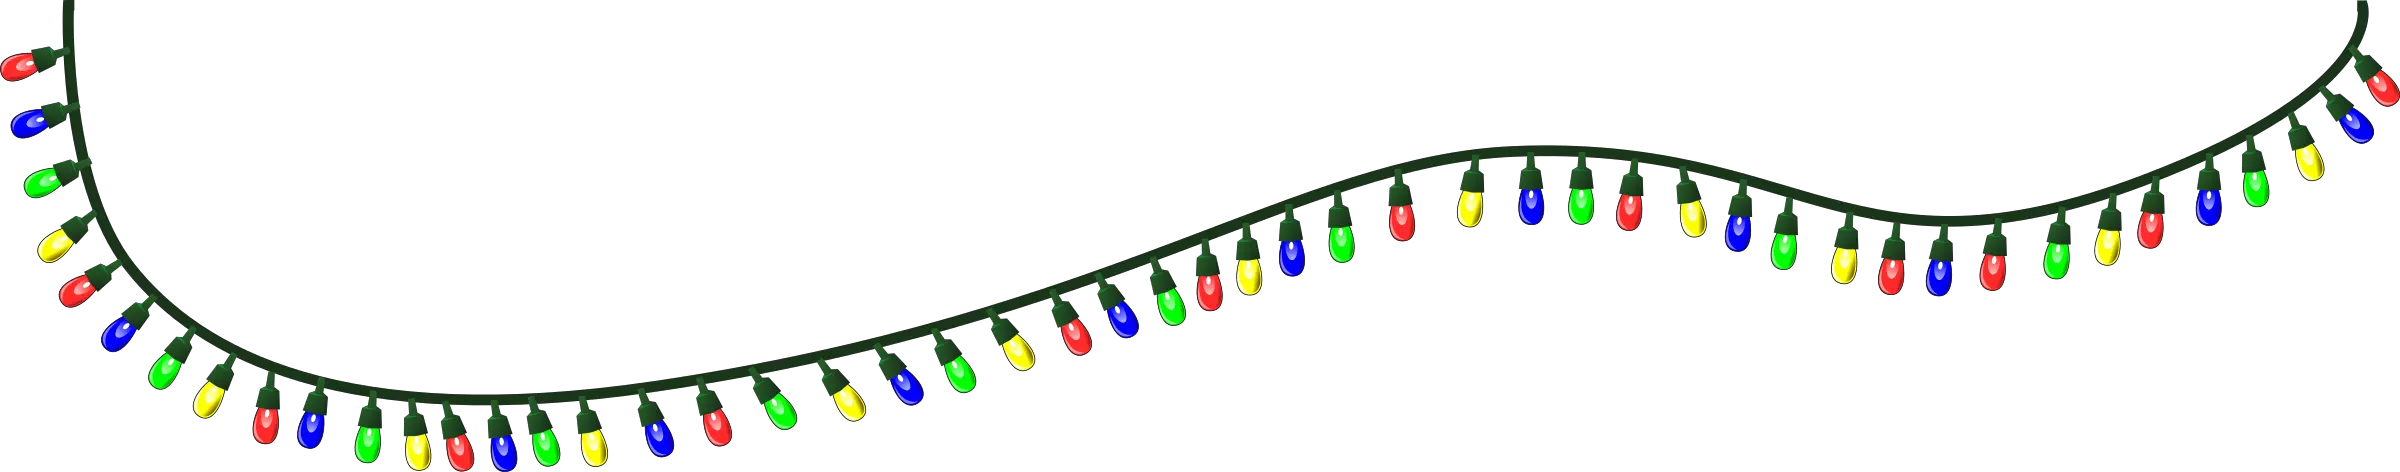 Christmas Light Pictures Png Transparent